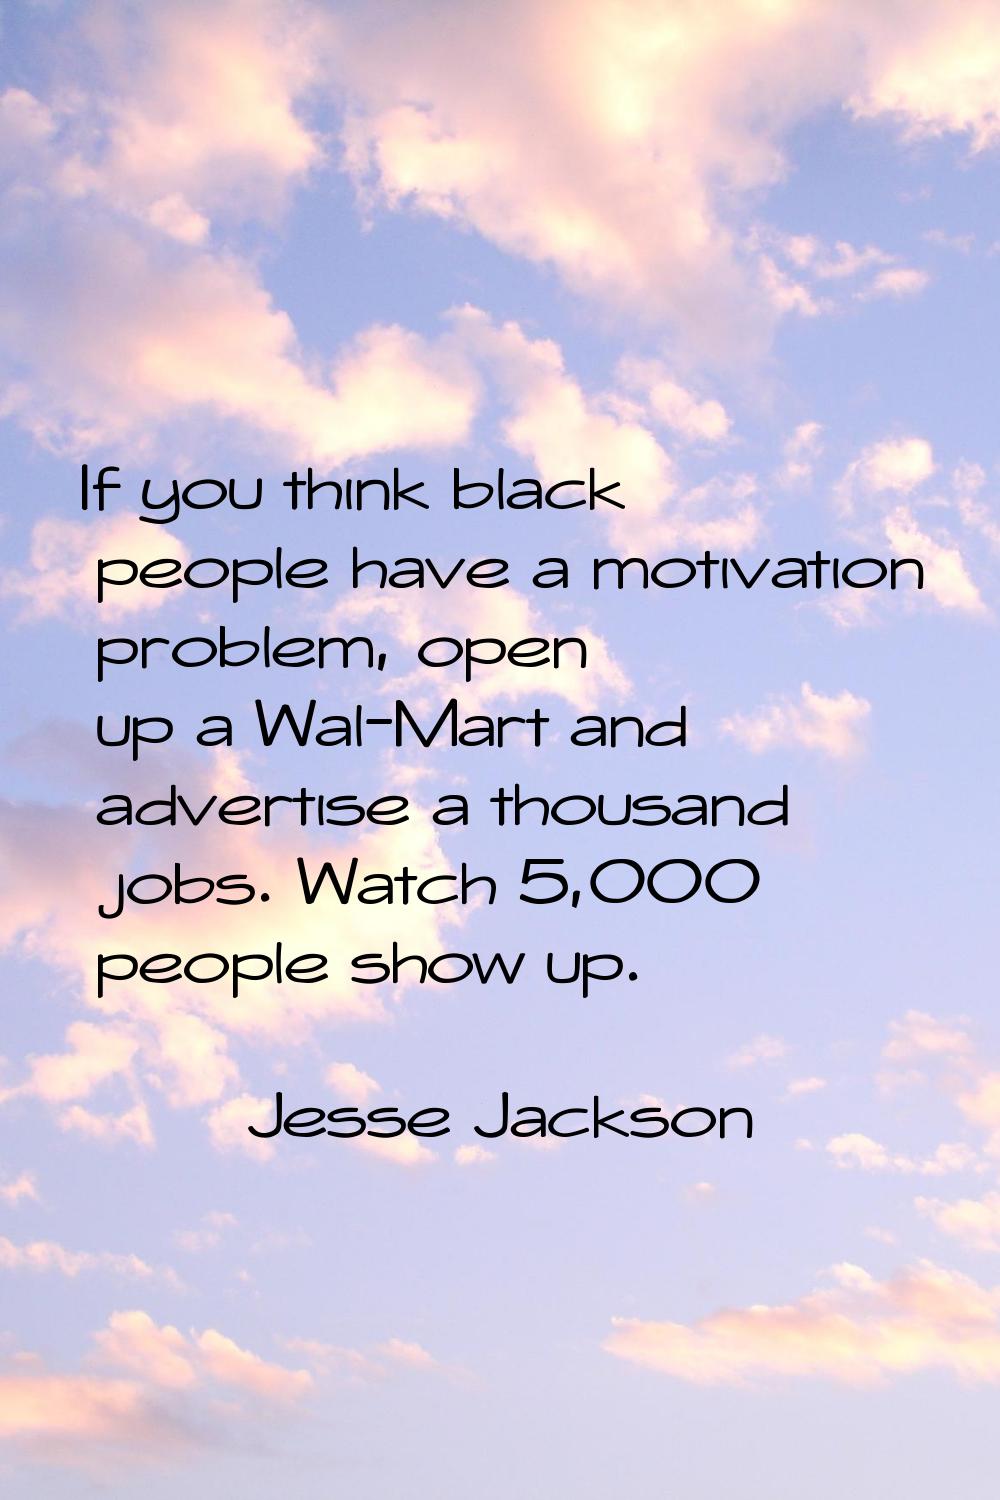 If you think black people have a motivation problem, open up a Wal-Mart and advertise a thousand jo